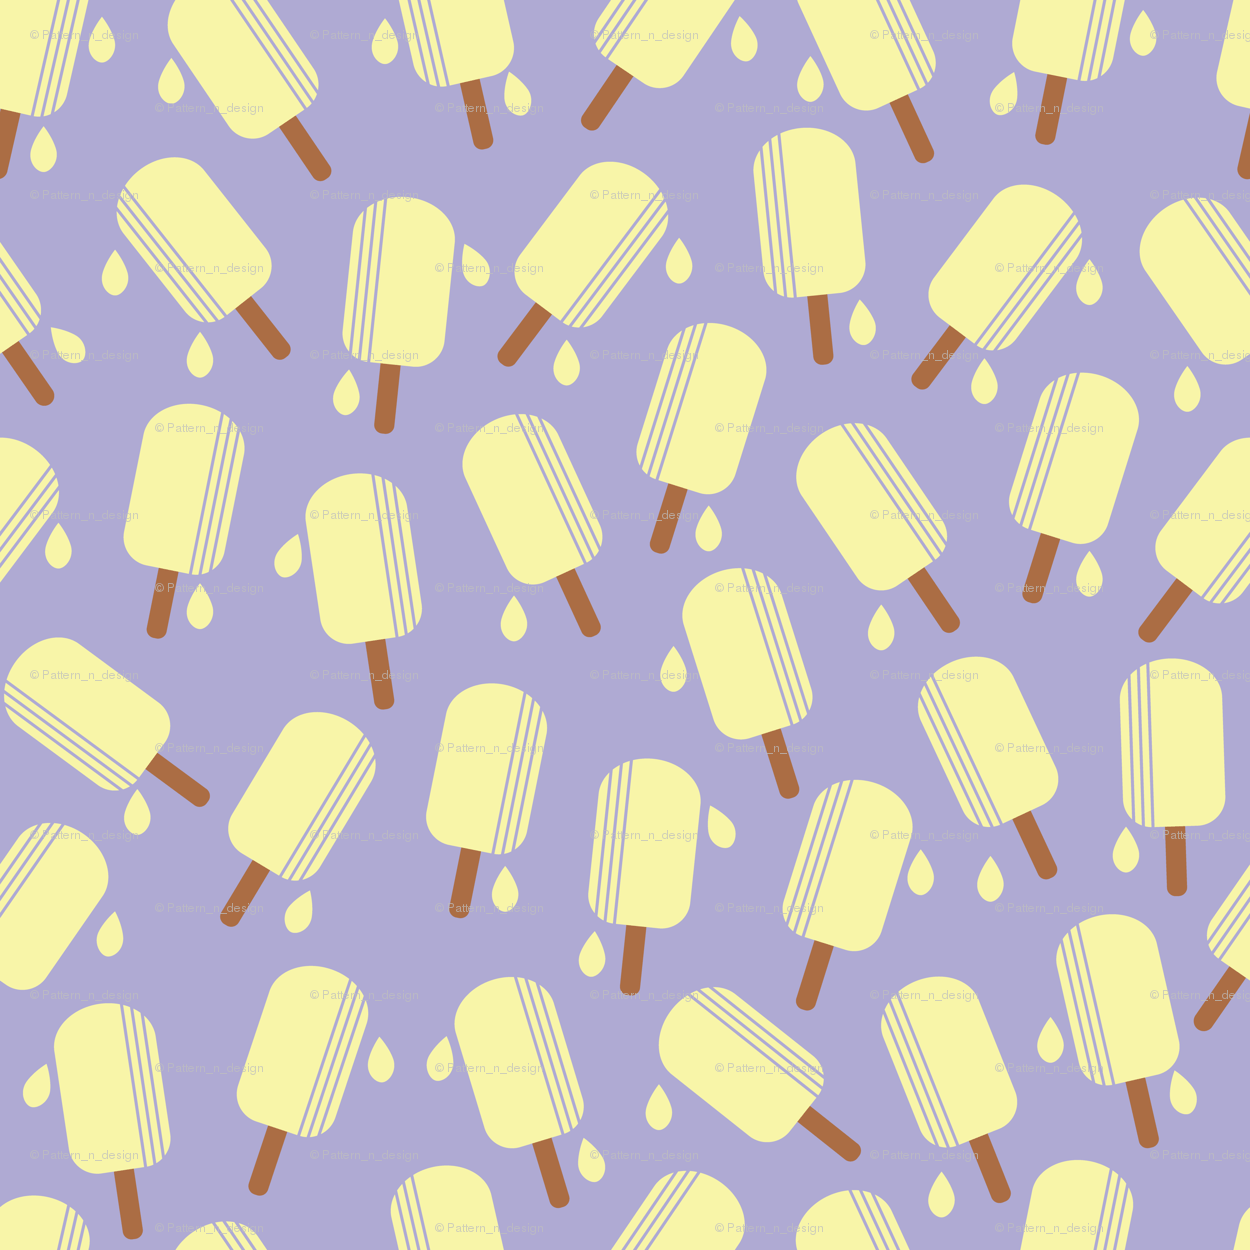 Simple and beautiful melted ice cream seamless pattern